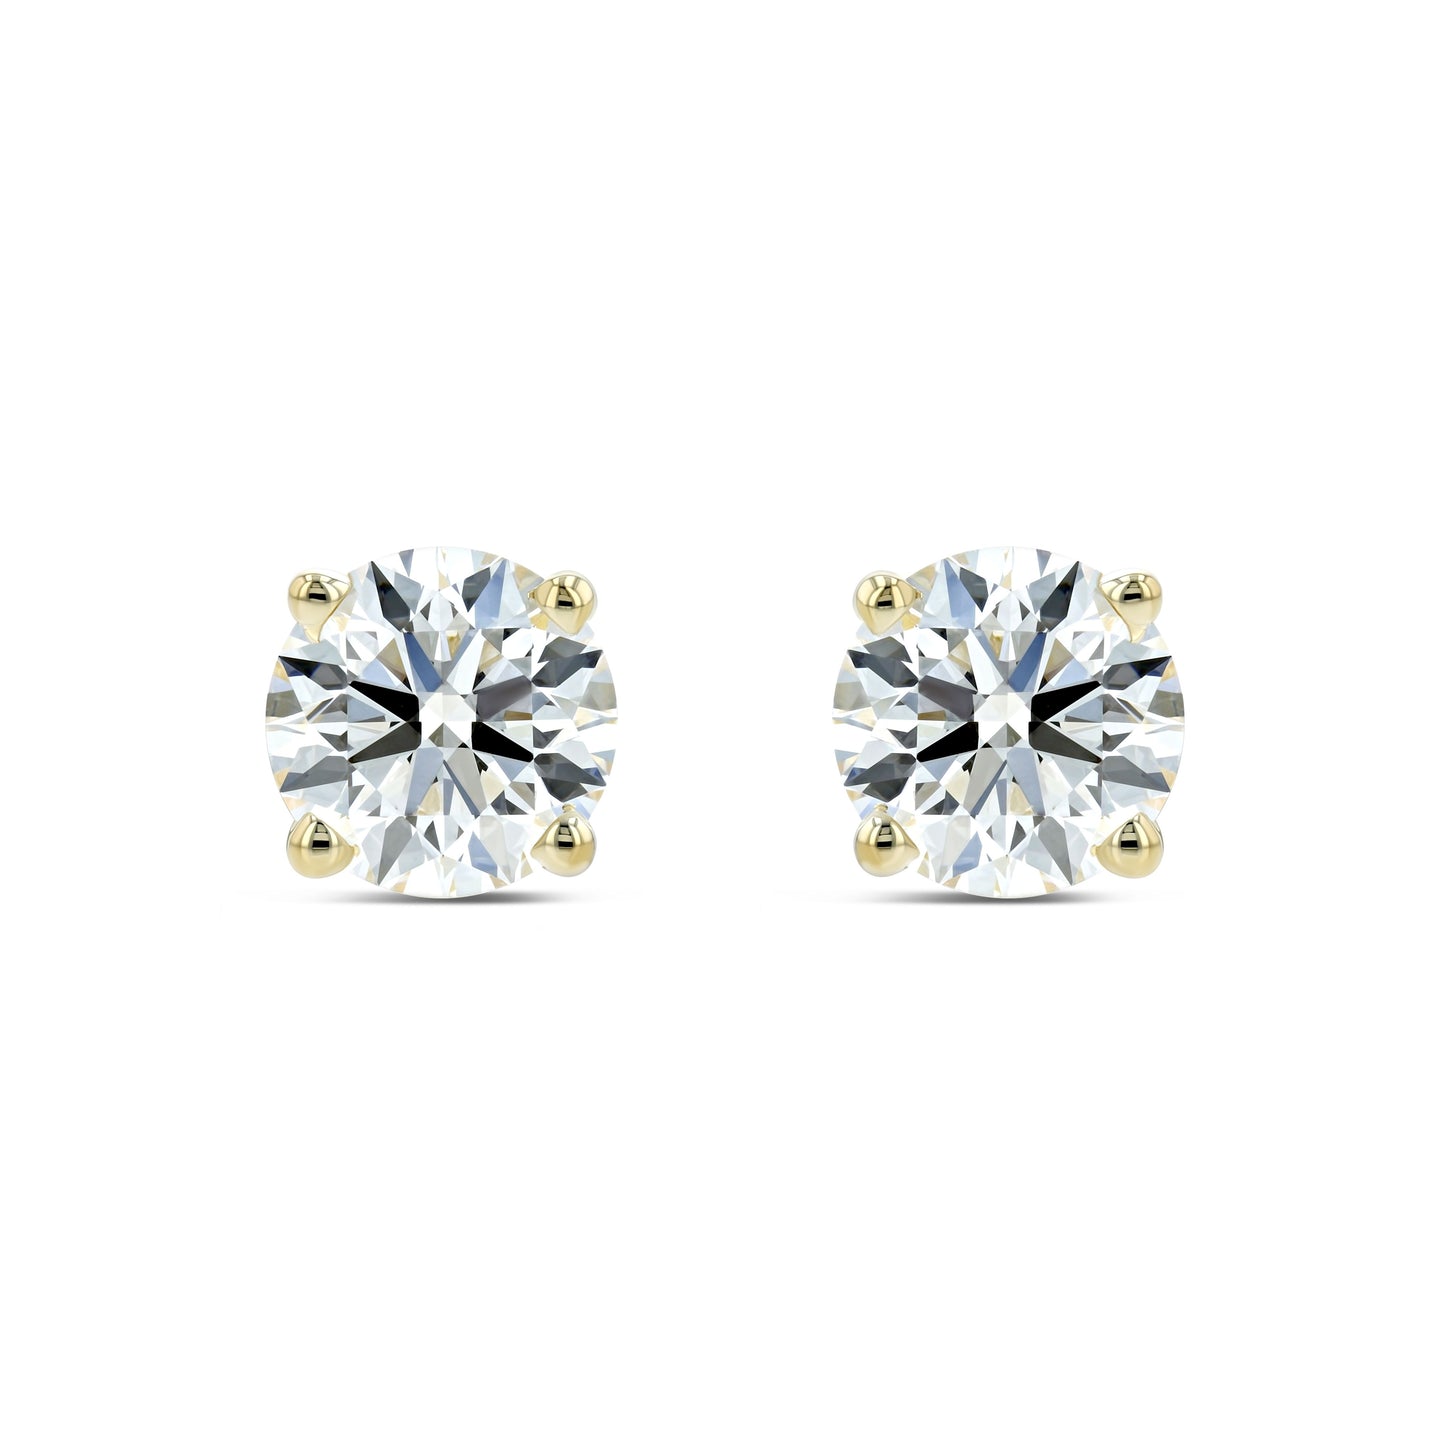 14k Yellow Gold 4-prong Round Diamond Stud Earrings 1ctw (5.00mm Ea), G Color, Si3 Clarity